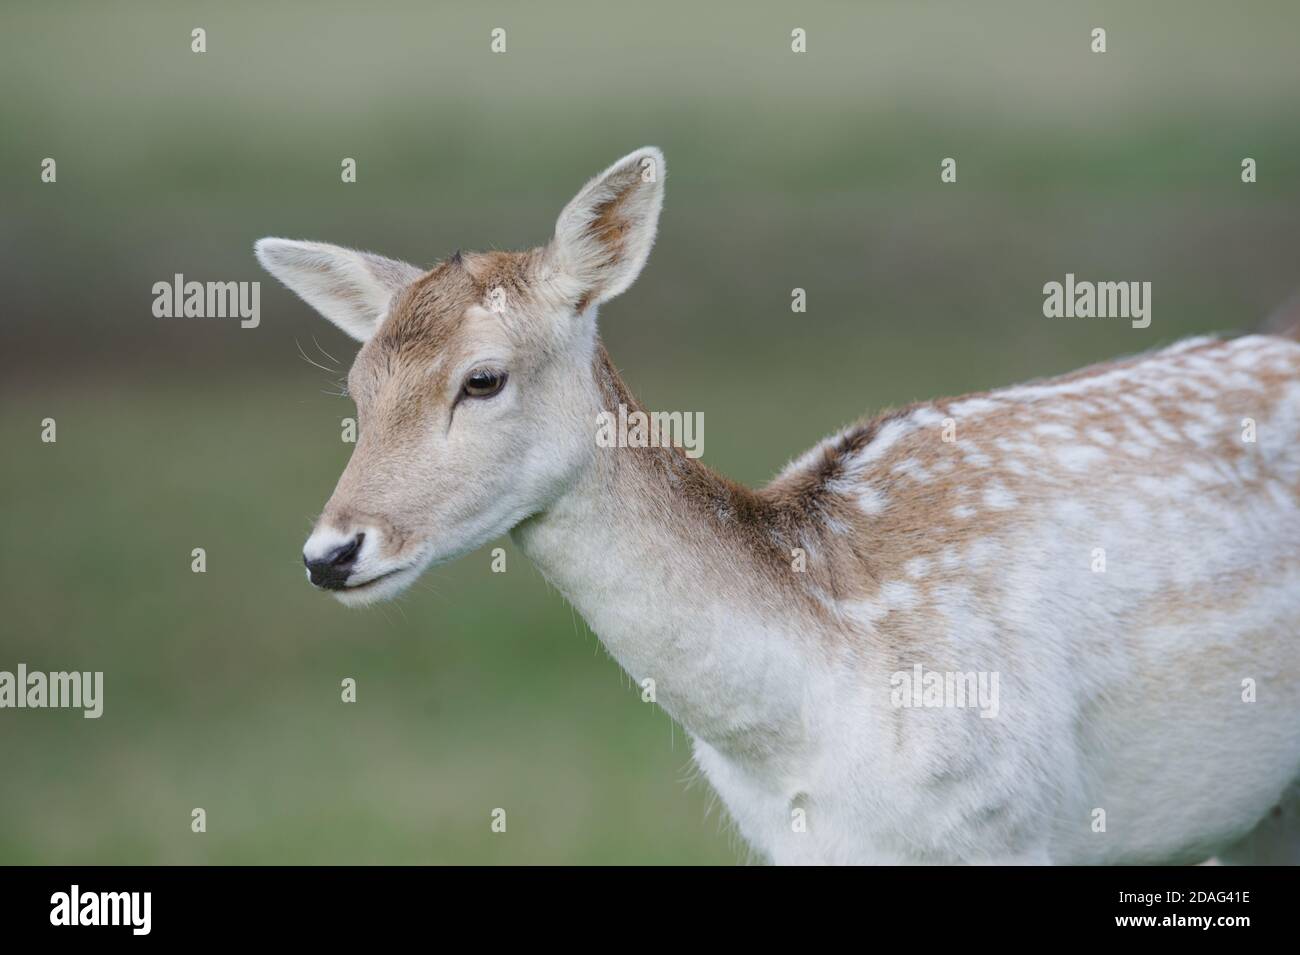 Richmond Park, London, UK. 12th November 2020. Rutting season in Richmond Park. Rutting season is between September and early November in the UK. Close up of a female deer. Andrew Steven Graham/Alamy Live News Stock Photo